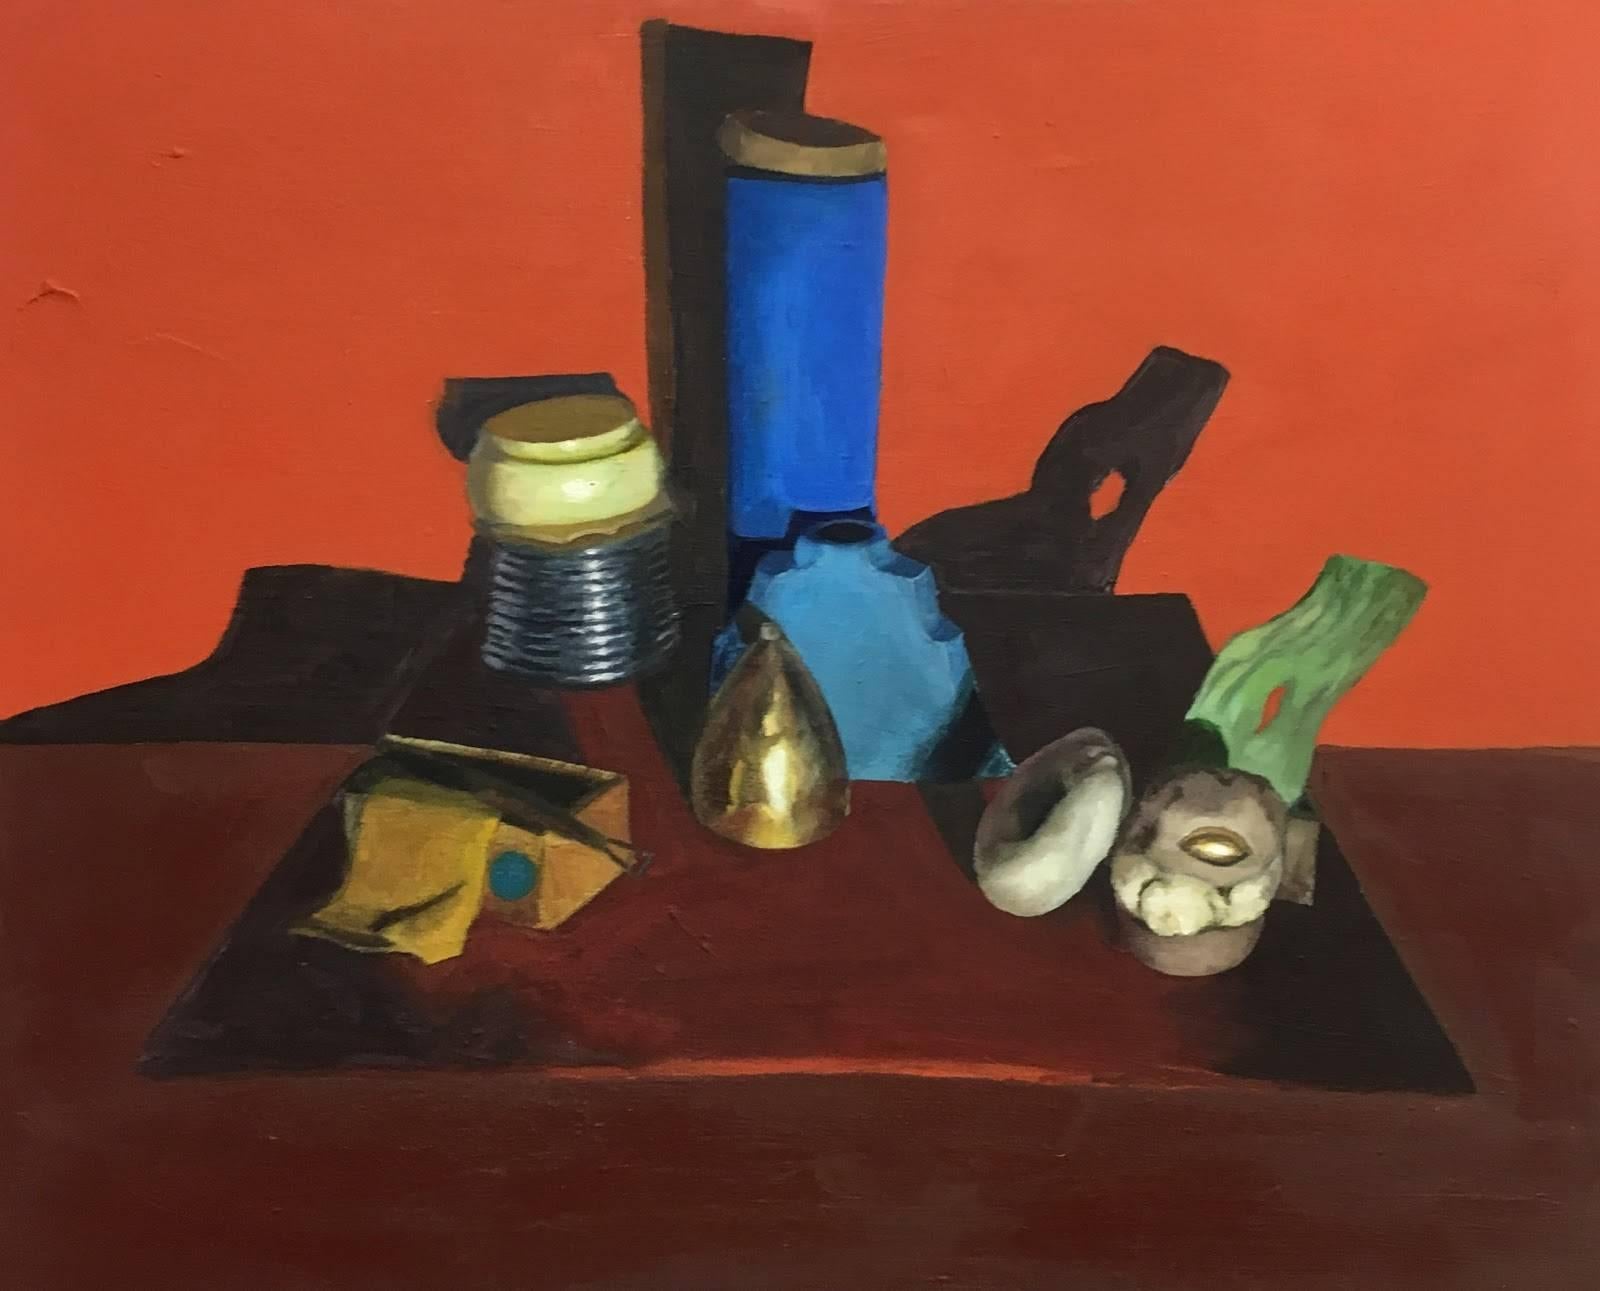 Contemporary still life oil painting by American painter Meg Franklin.

&quot;Orange Still Life,&quot; 2015
Oil on canvas.
24 x 30 in.

Meg Franklin is a Brooklyn-based painter originally from rural Northeast Georgia. She paints still lifes made up